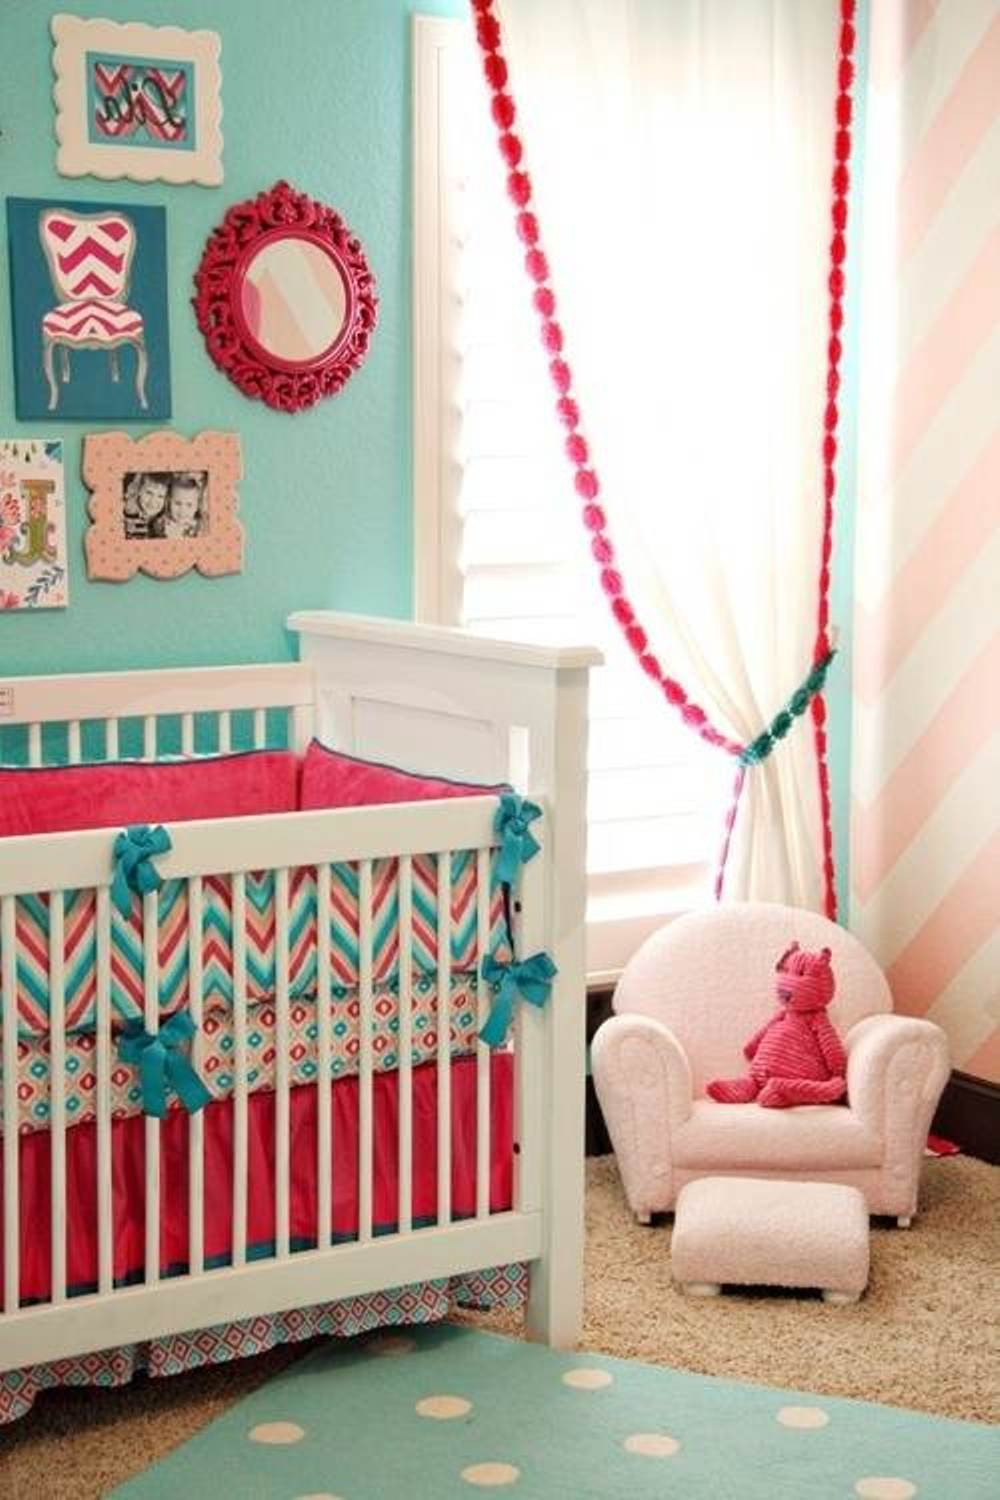 Room Decor For Baby Girls
 25 Baby Bedroom Design Ideas For Your Cutie Pie